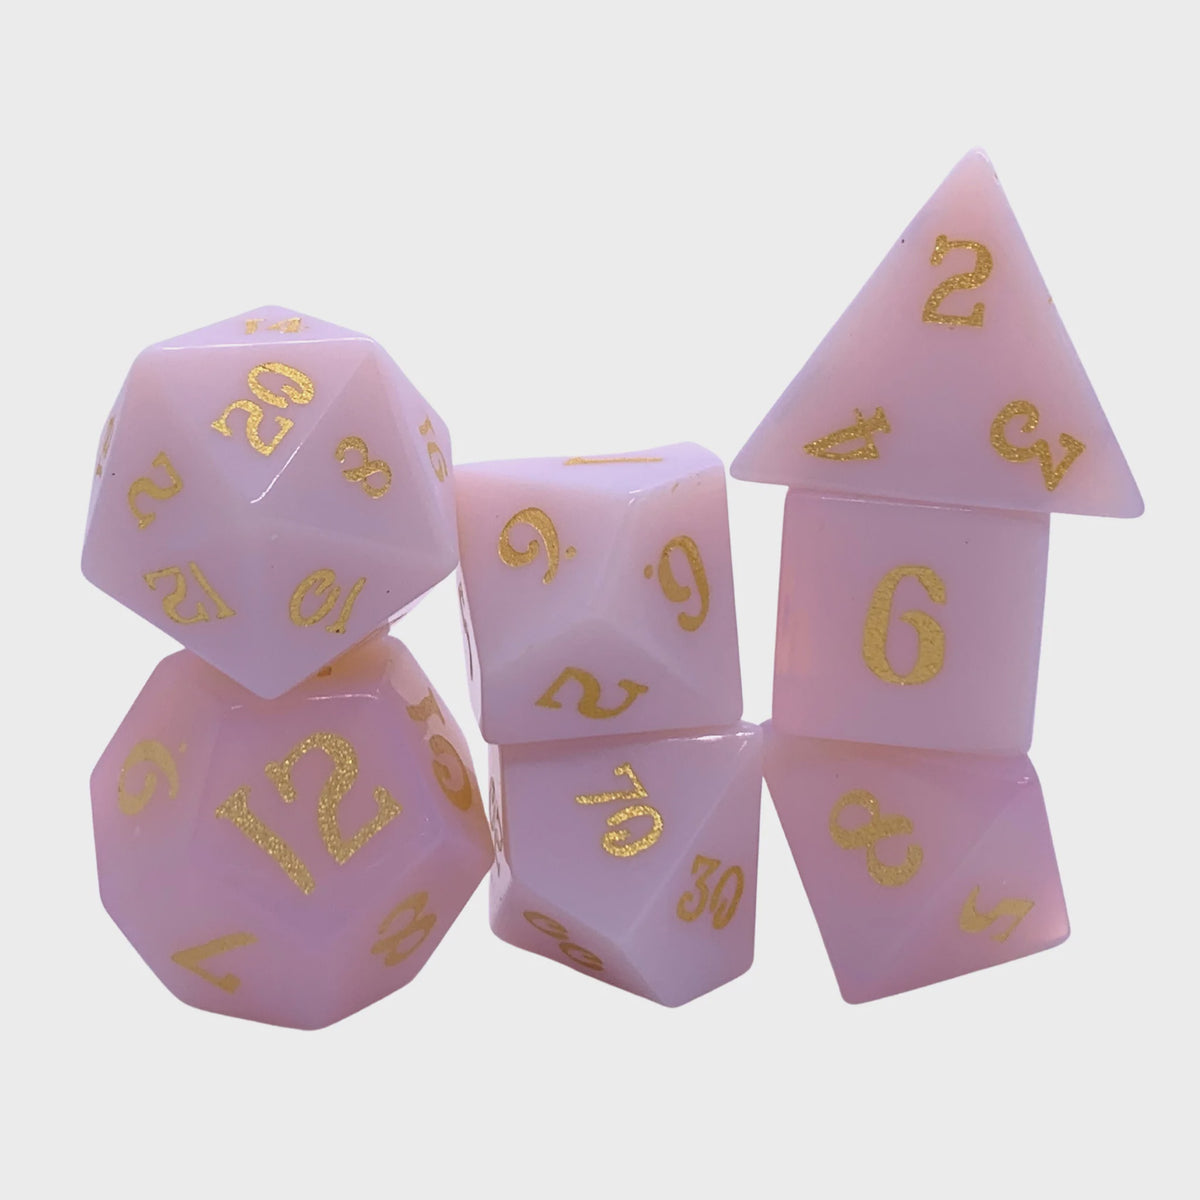 Level Up Dice - Pink Opalite Polyhedral Dice Set